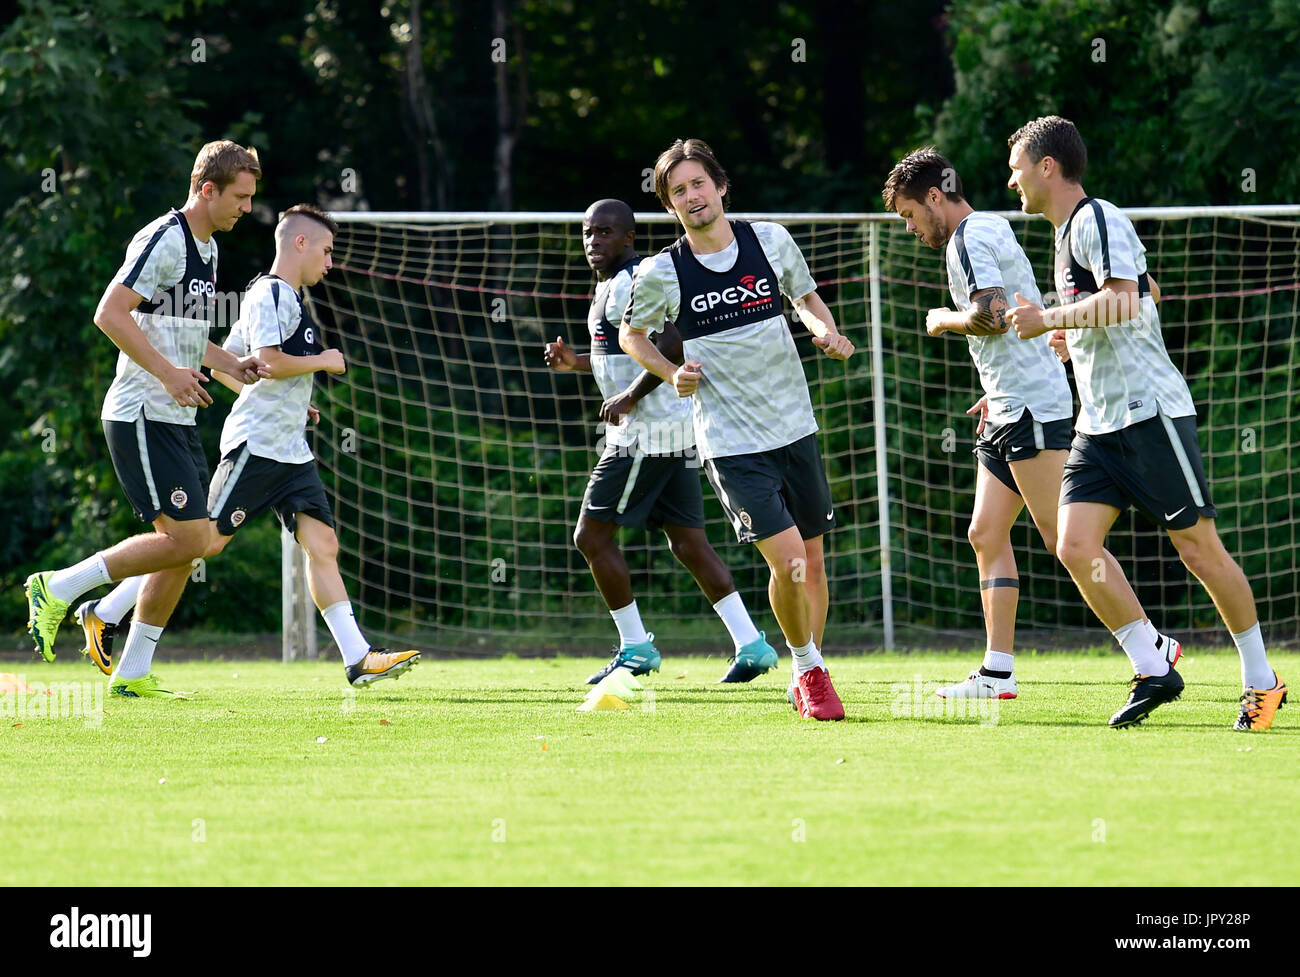 Prague, Czech Republic. 02nd Aug, 2017. Player of Sparta Tomas Rosicky, centre, attends a training session prior to the 3rd qualifying round, Football European League match AC Sparta Praha vs Red Star Belgrade in Prague, Czech Republic, August 2, 2017. Credit: Roman Vondrous/CTK Photo/Alamy Live News Stock Photo